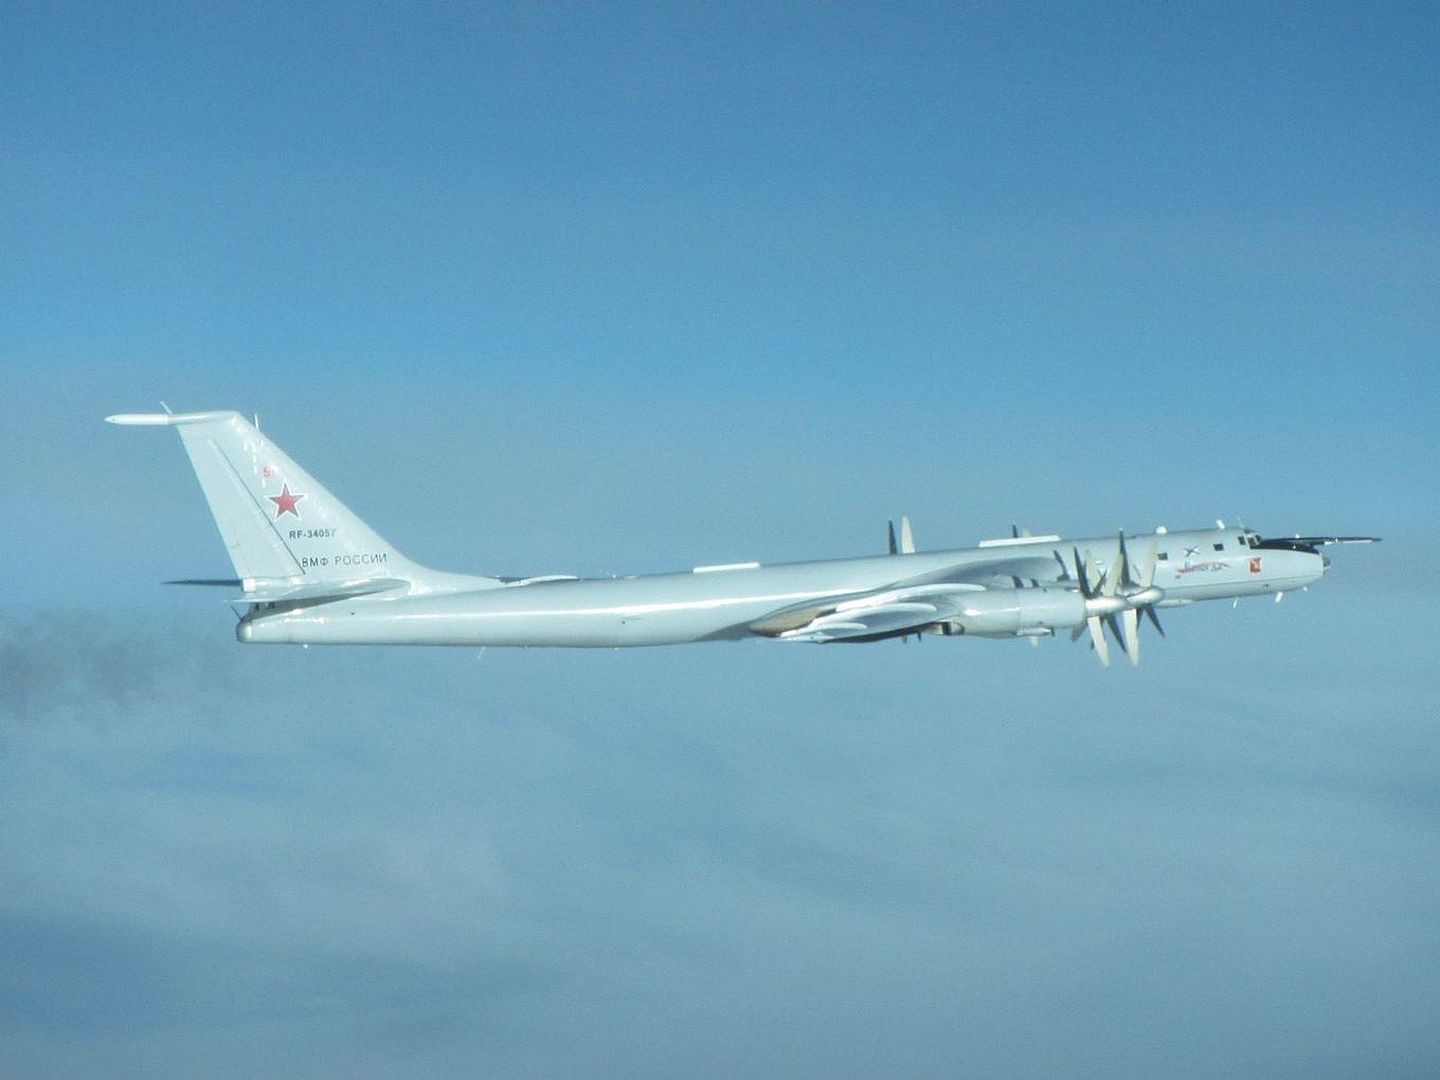 Typhoons Scrambled To Intercept Russian Aircraft Close To UK Airspace 1